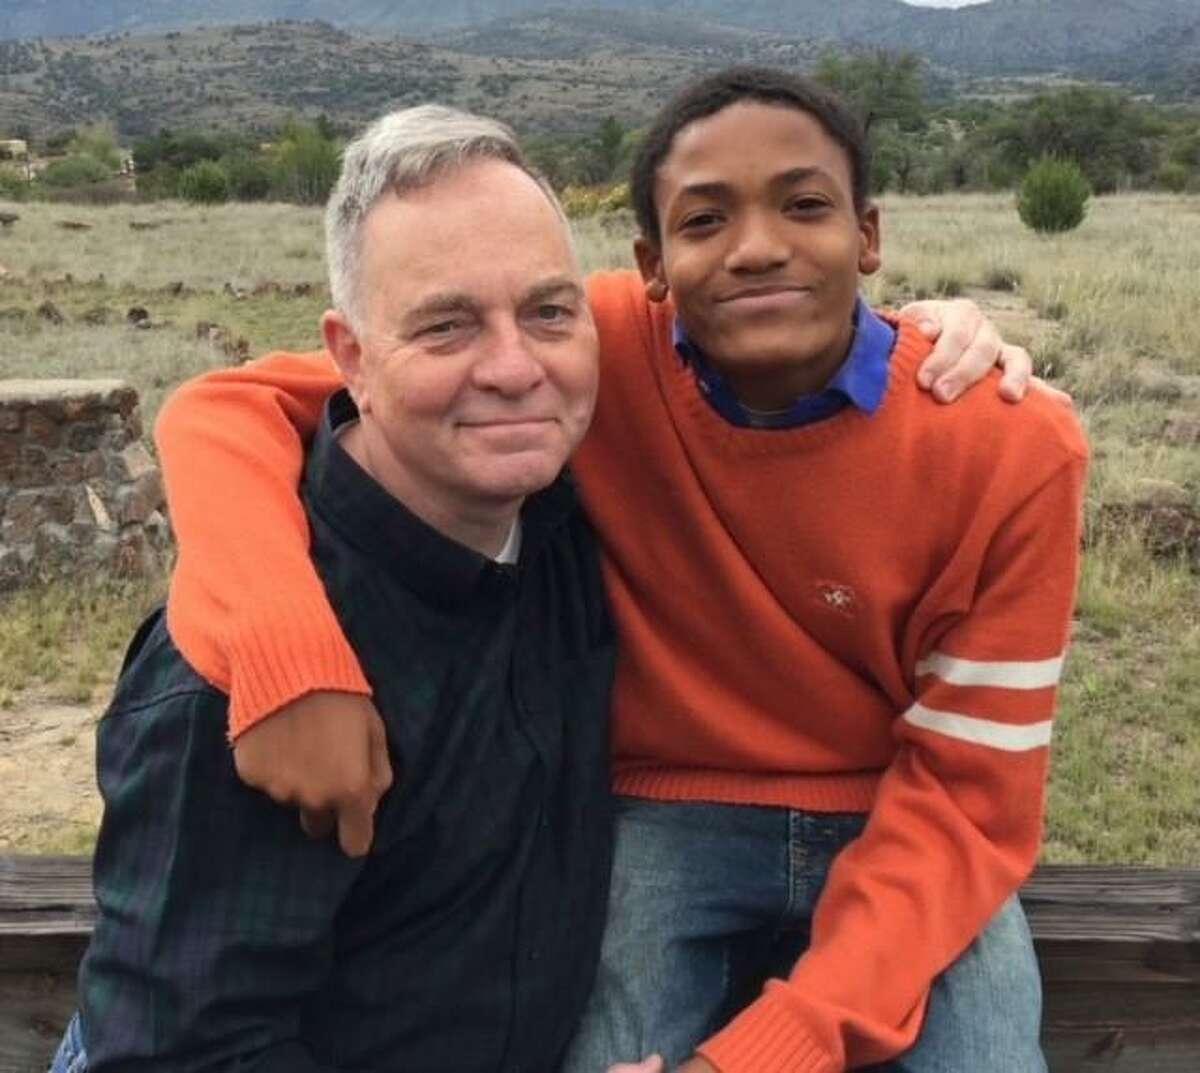 Kevin Fisher-Paulson and his son Zane in Fort Davis, Texas, in October 2018.